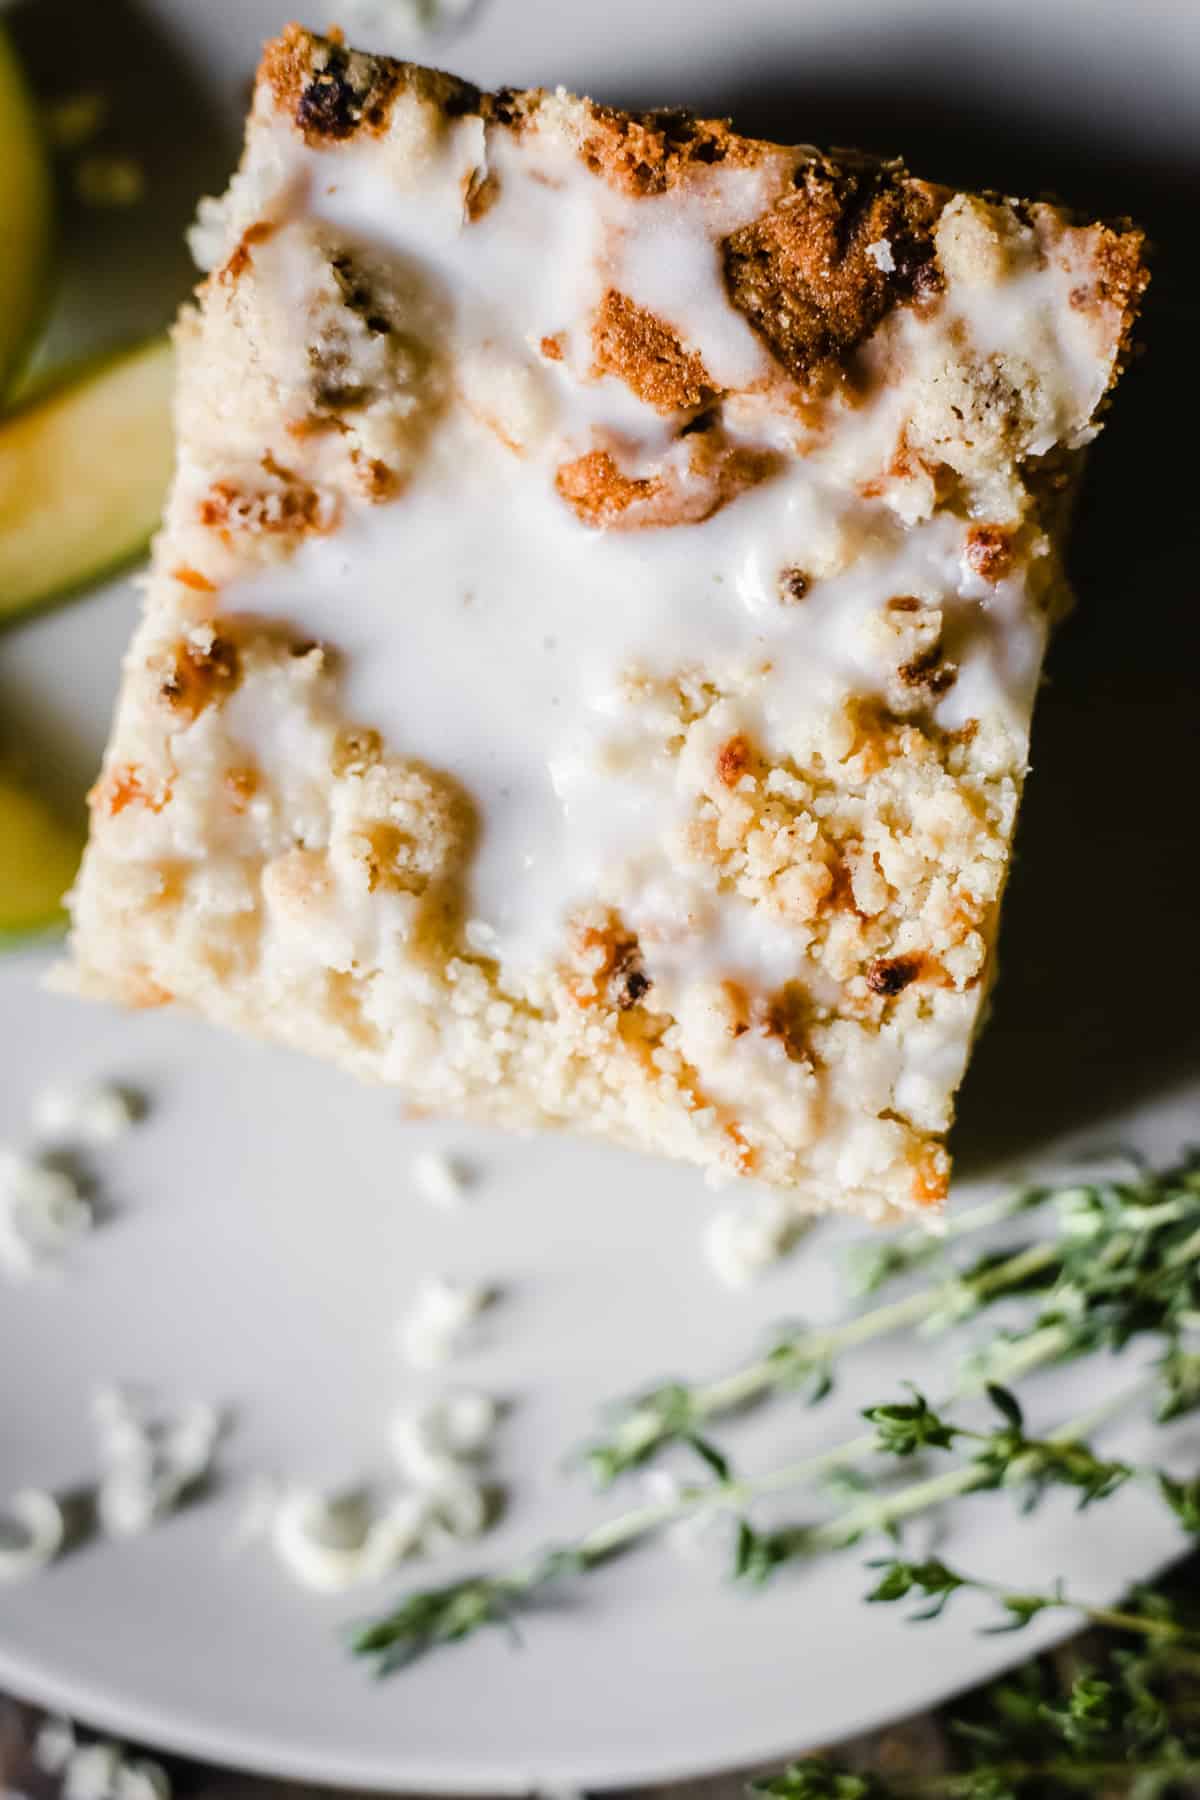 A slice of Apple Cheddar Thyme Crumble Cake on a plate